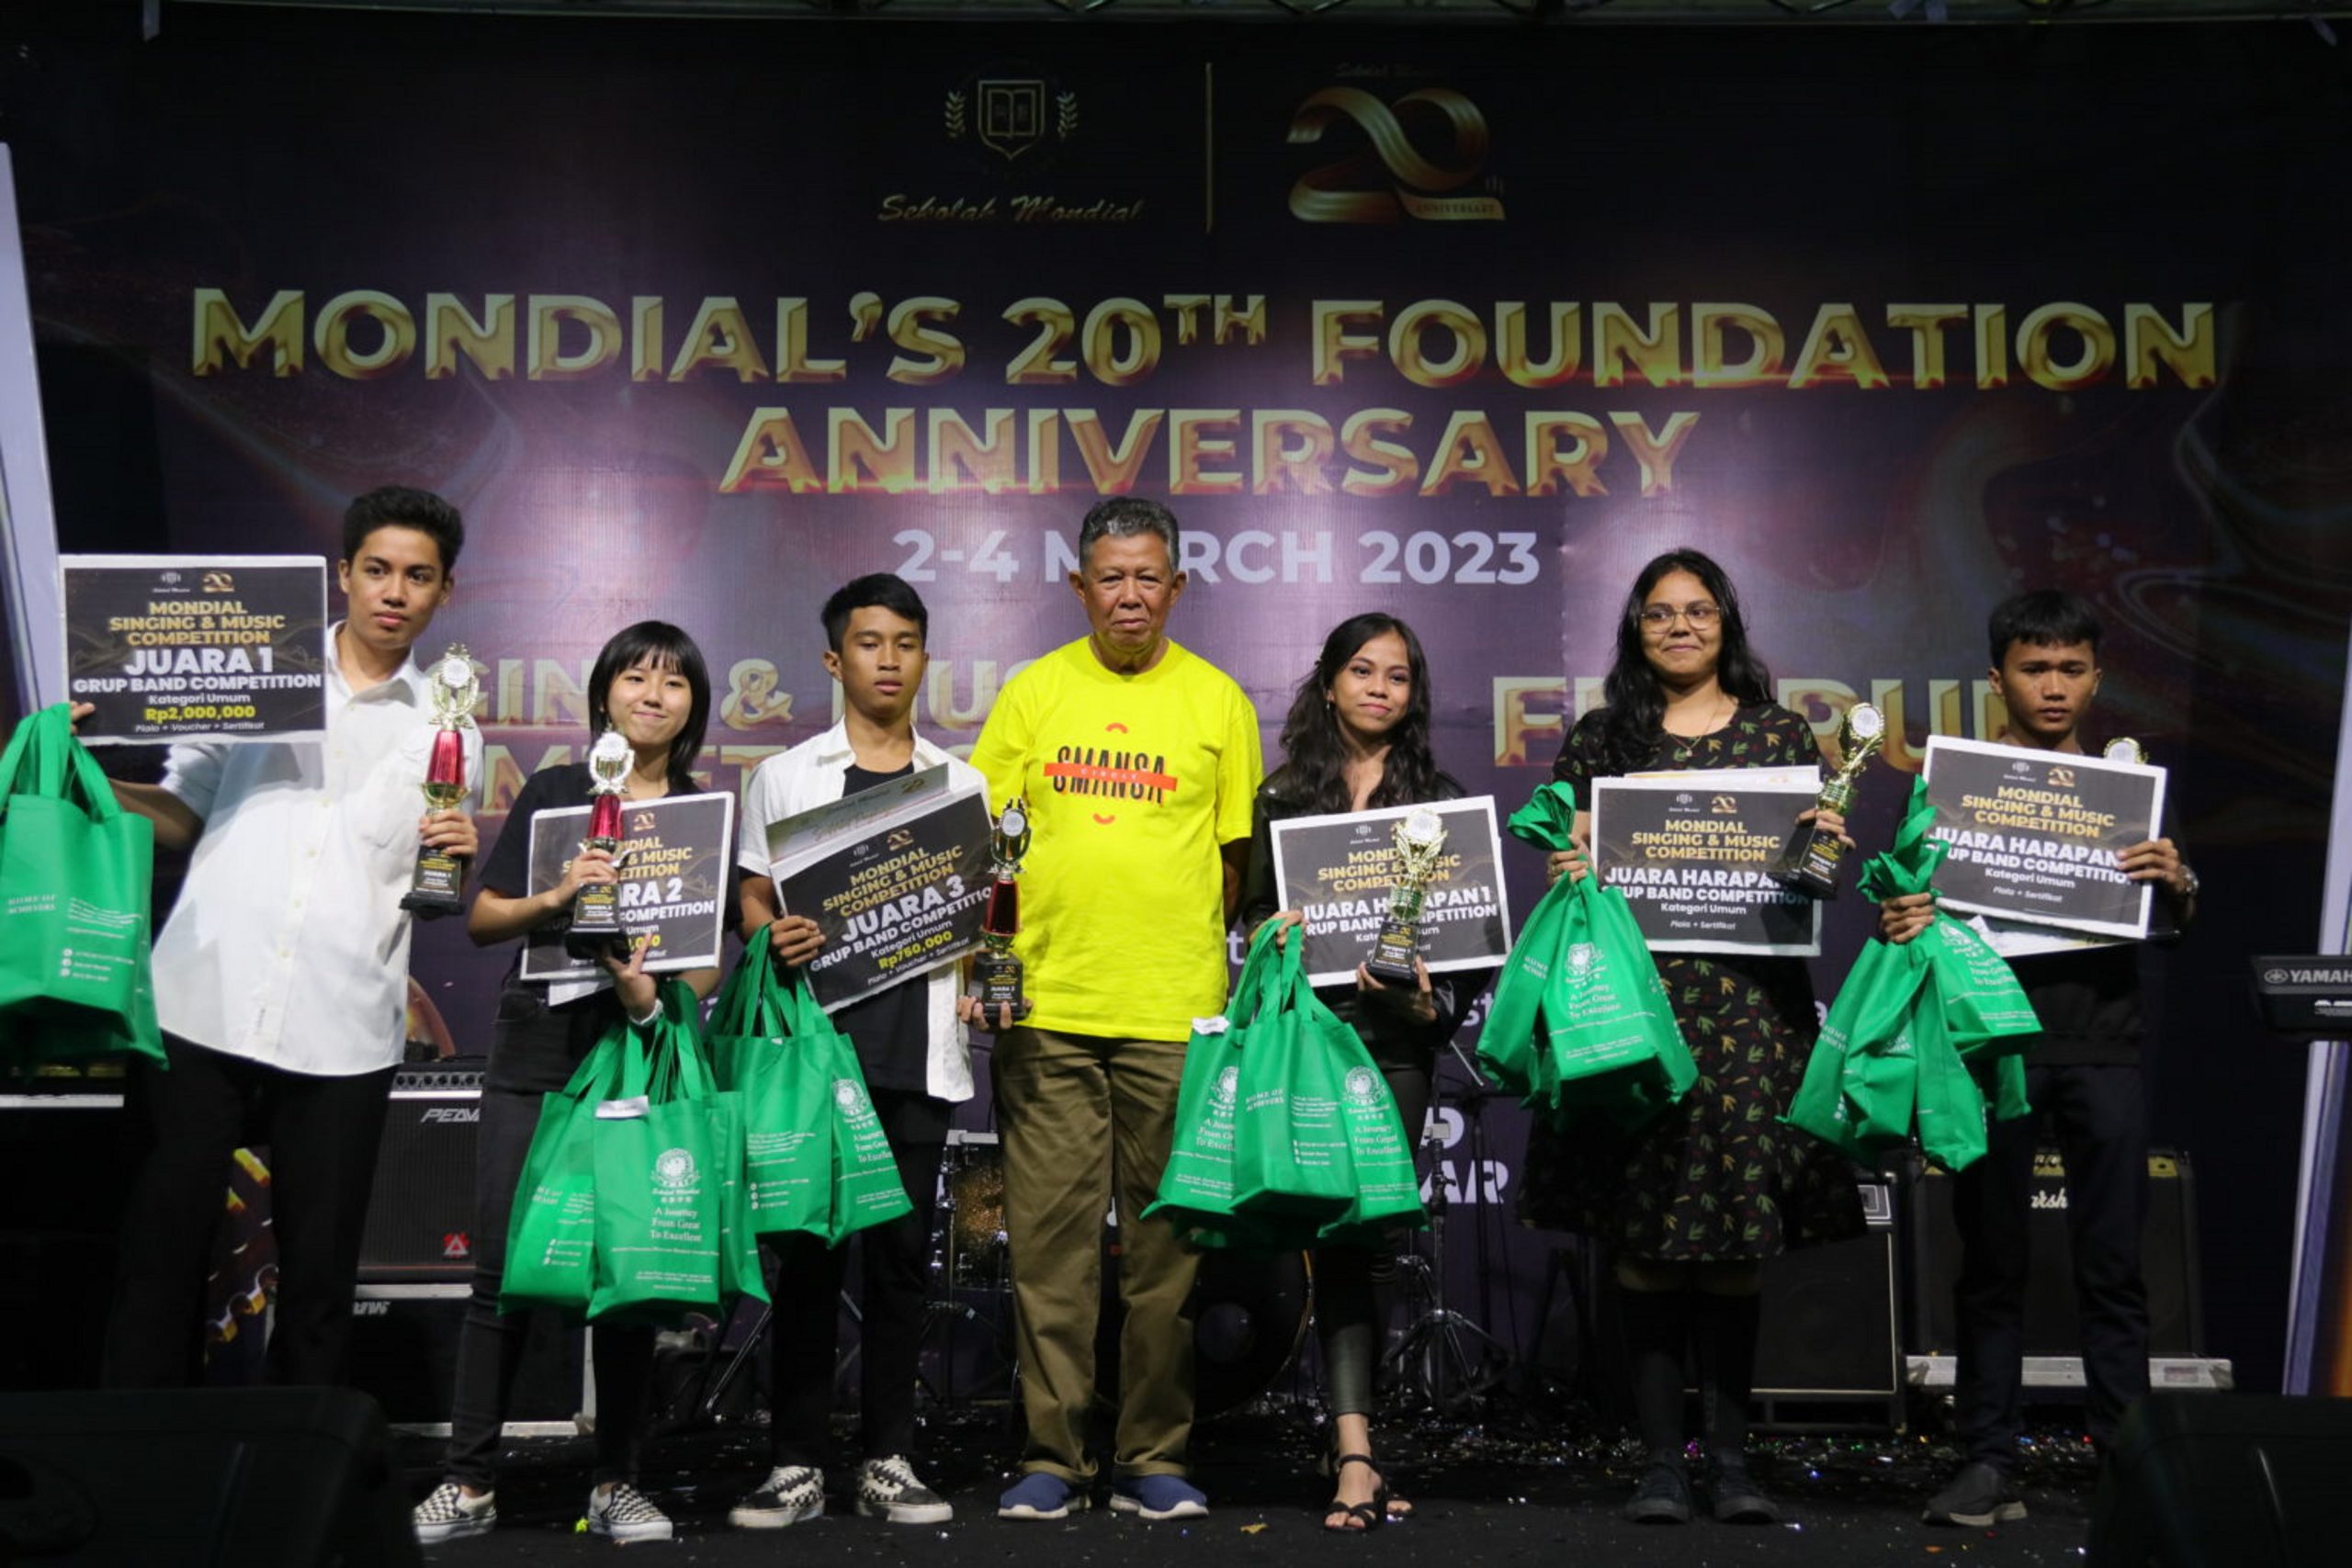 Mondial Singing and Band Competition 2023